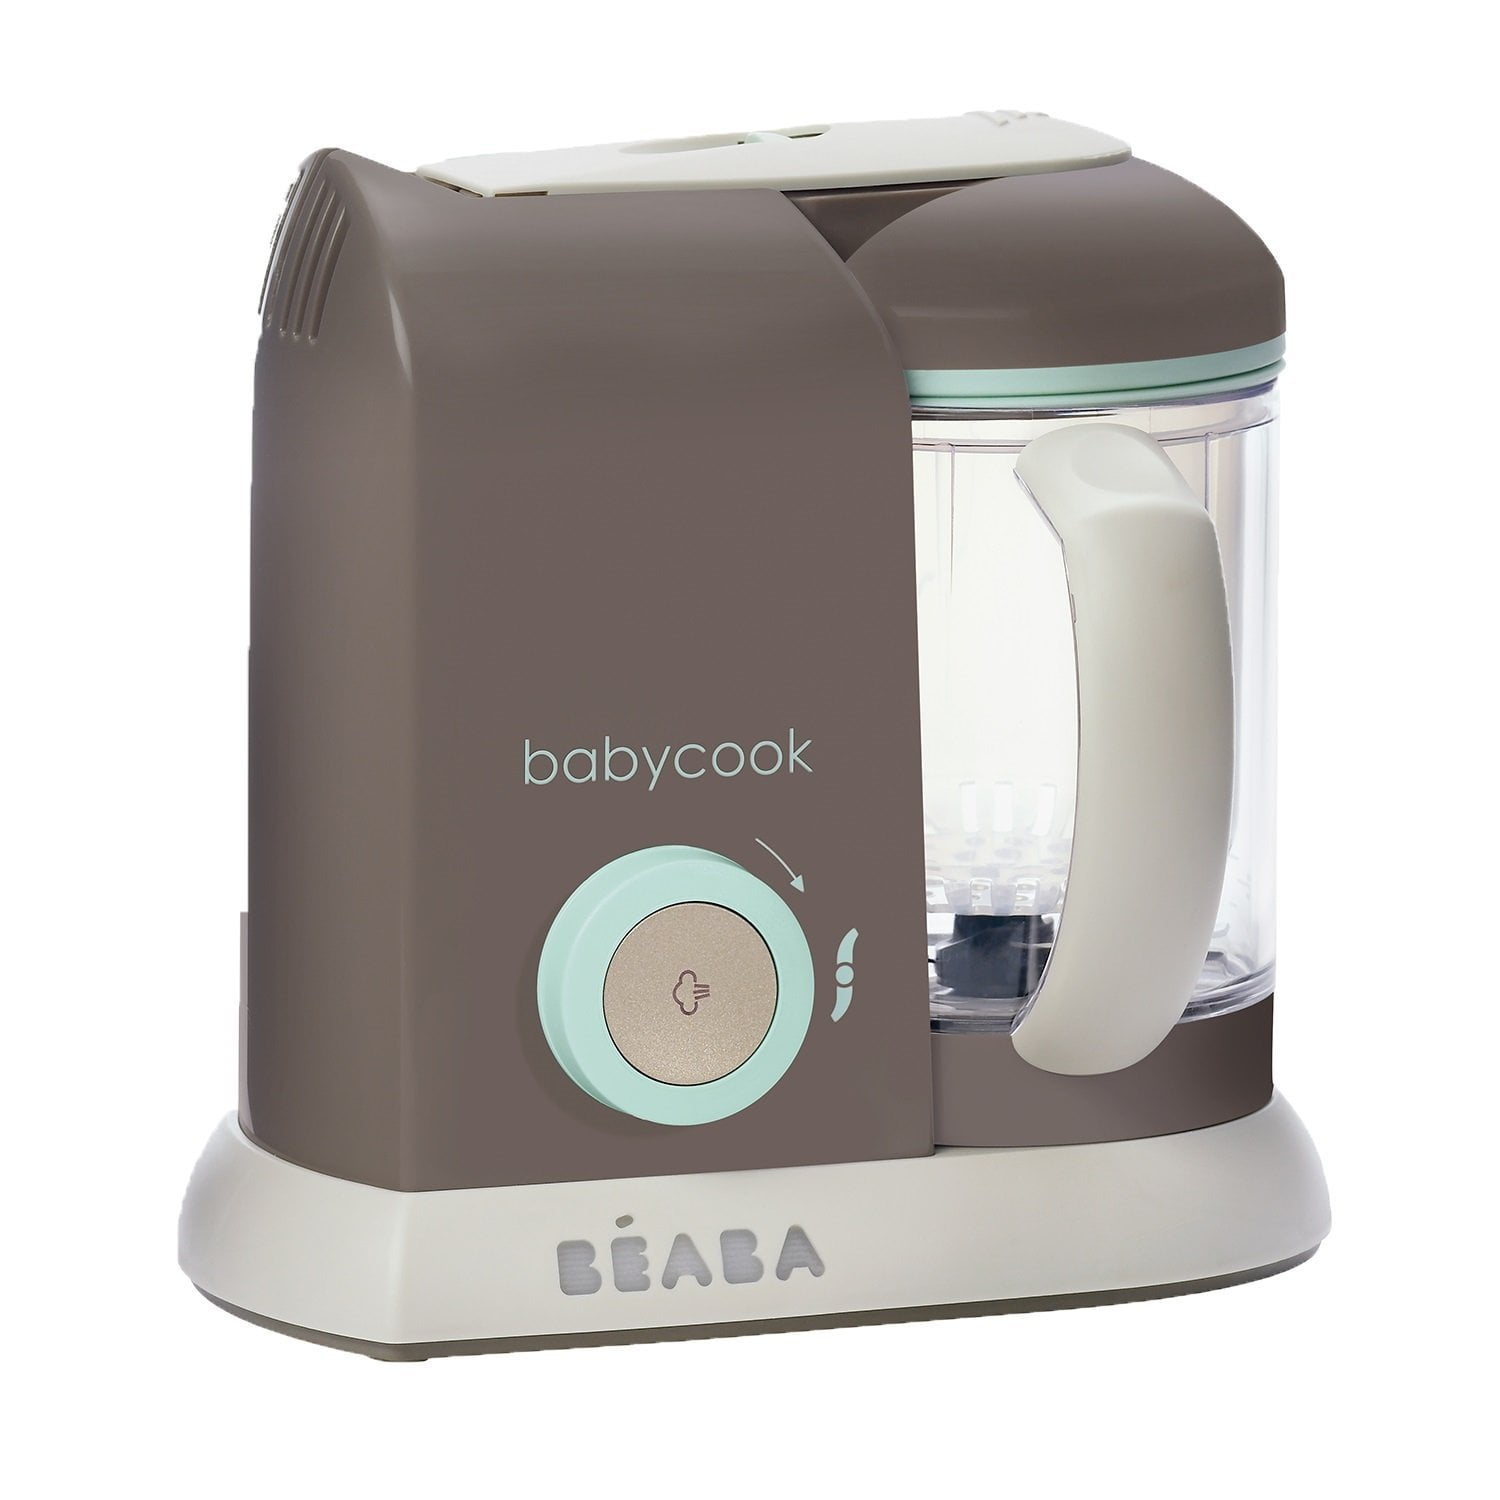 BEABA Babycook Duo 4 in 1 Steam Cooker and Blender, Cook at Home, 9.4 Cups,  Dishwasher Safe, Rose Gold for Sale in Temple City, CA - OfferUp